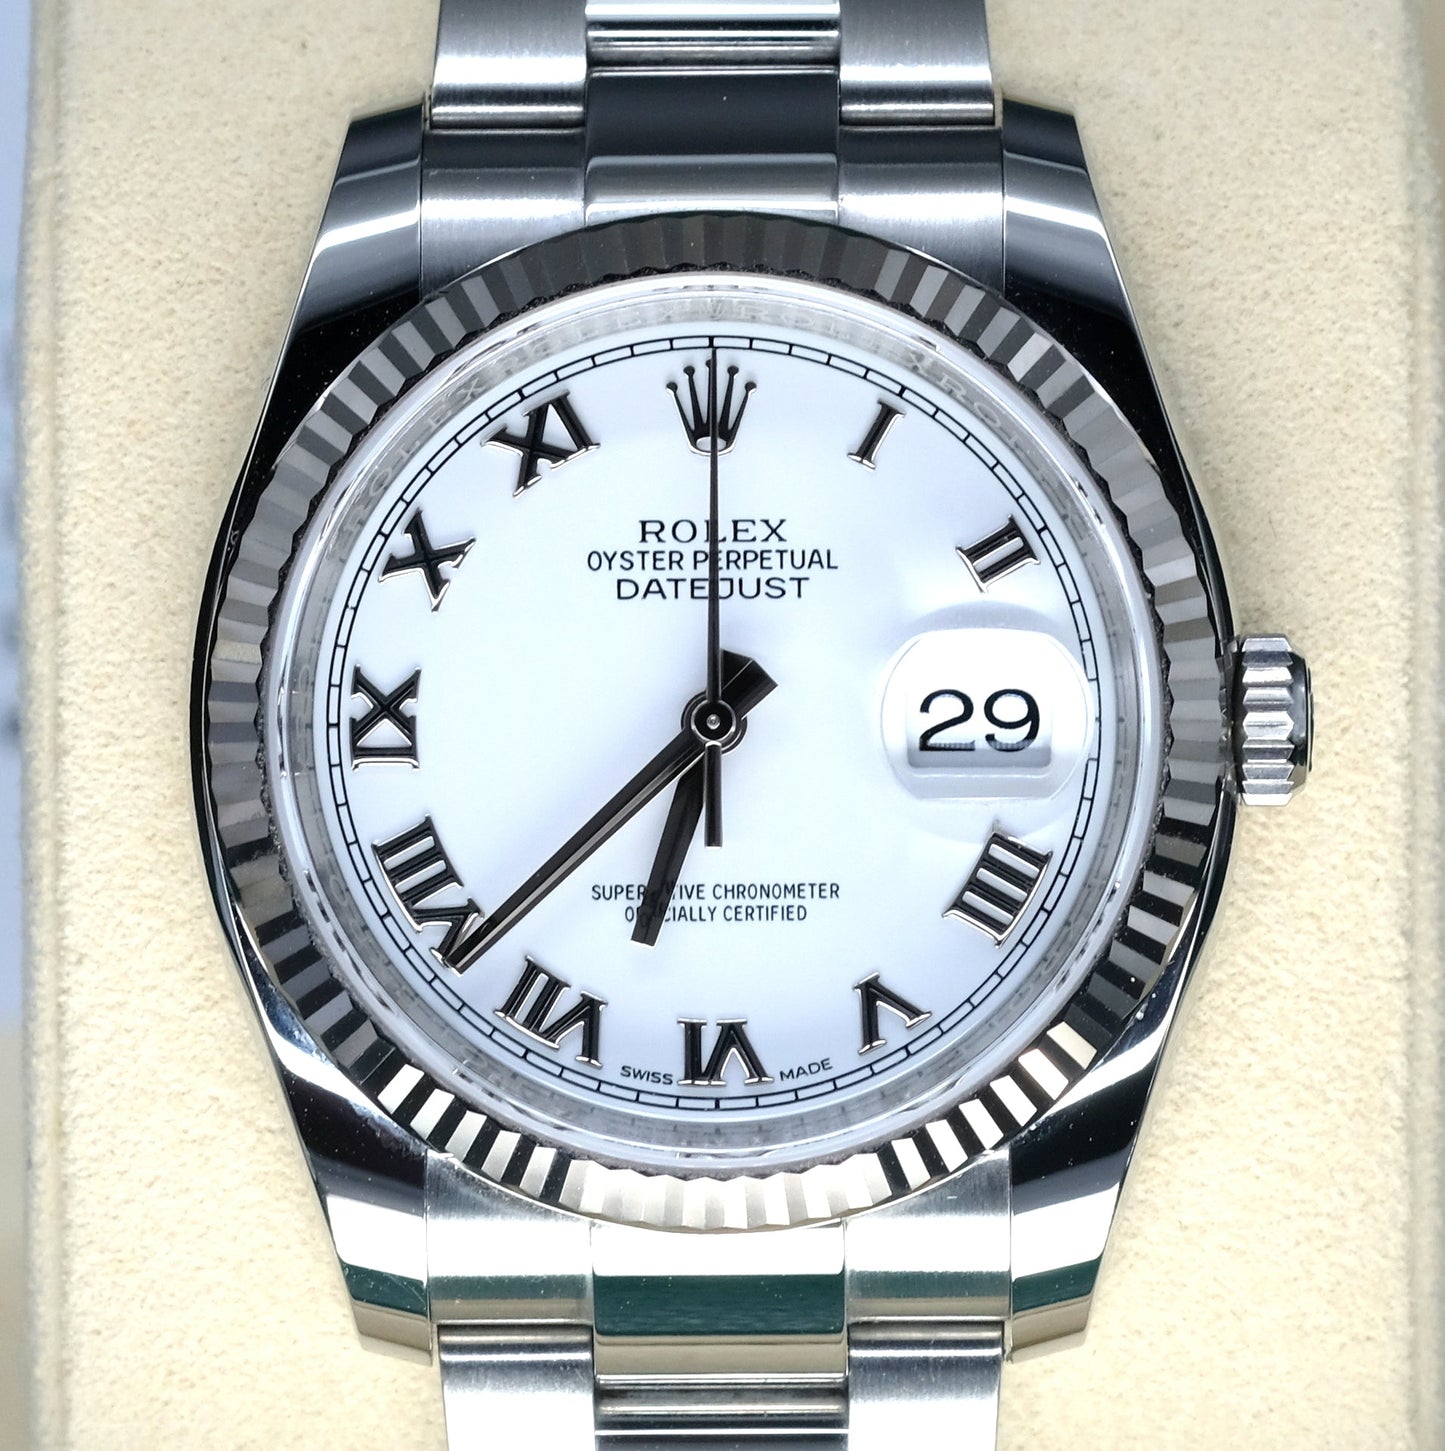 [Pre-Owned Watch] Rolex Datejust 36mm 116234 White Roman Dial (Oyster Bracelet)